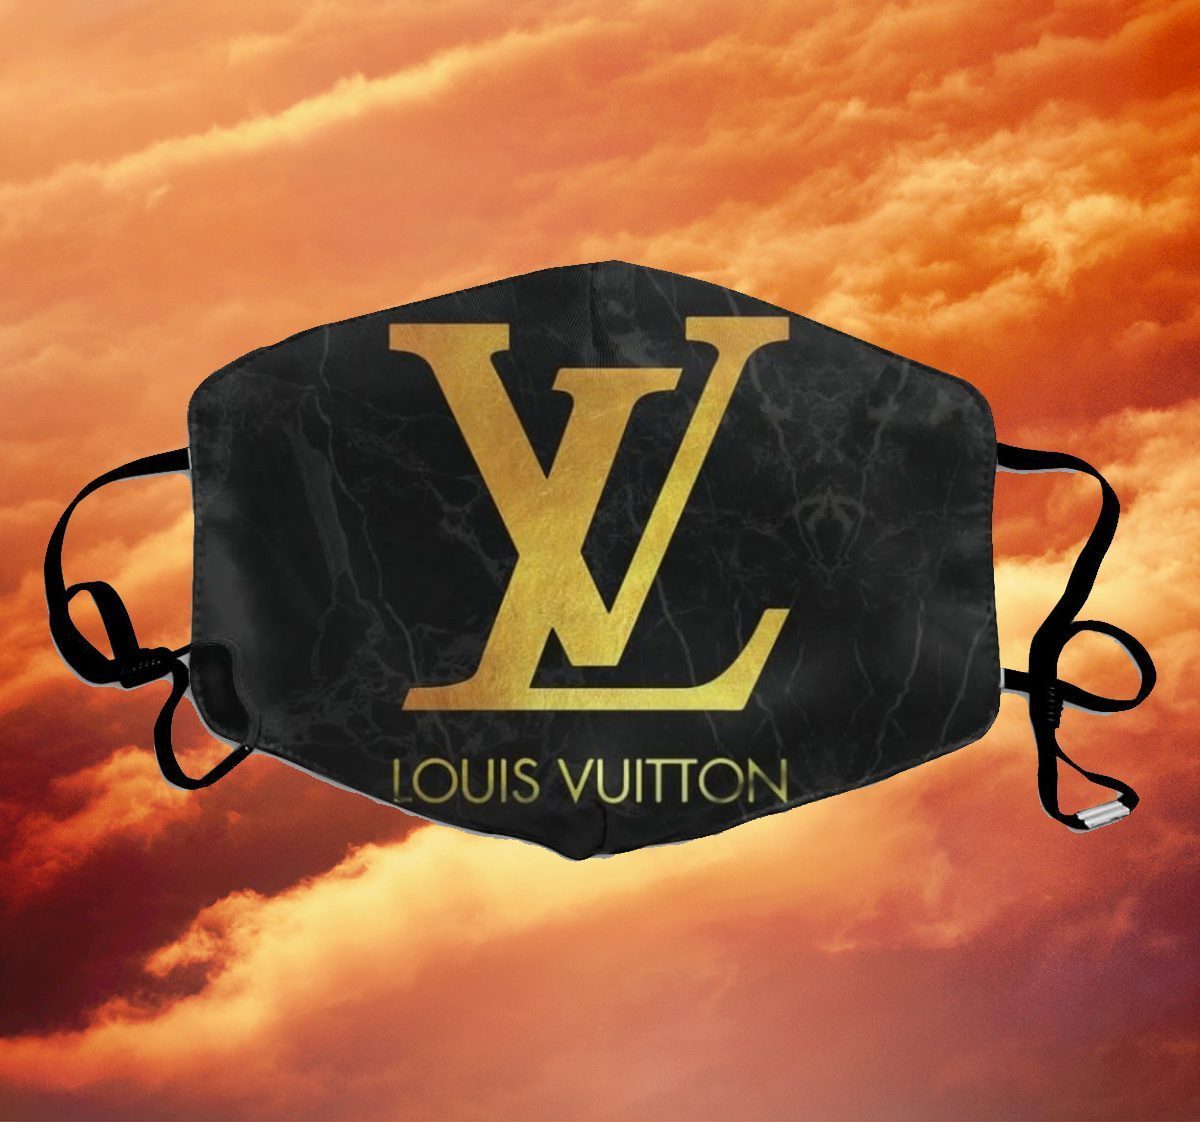 LV Louis Vuitton – Black and Gold – Lifestyle and Fashion Face Cover - Reviewshirts Office